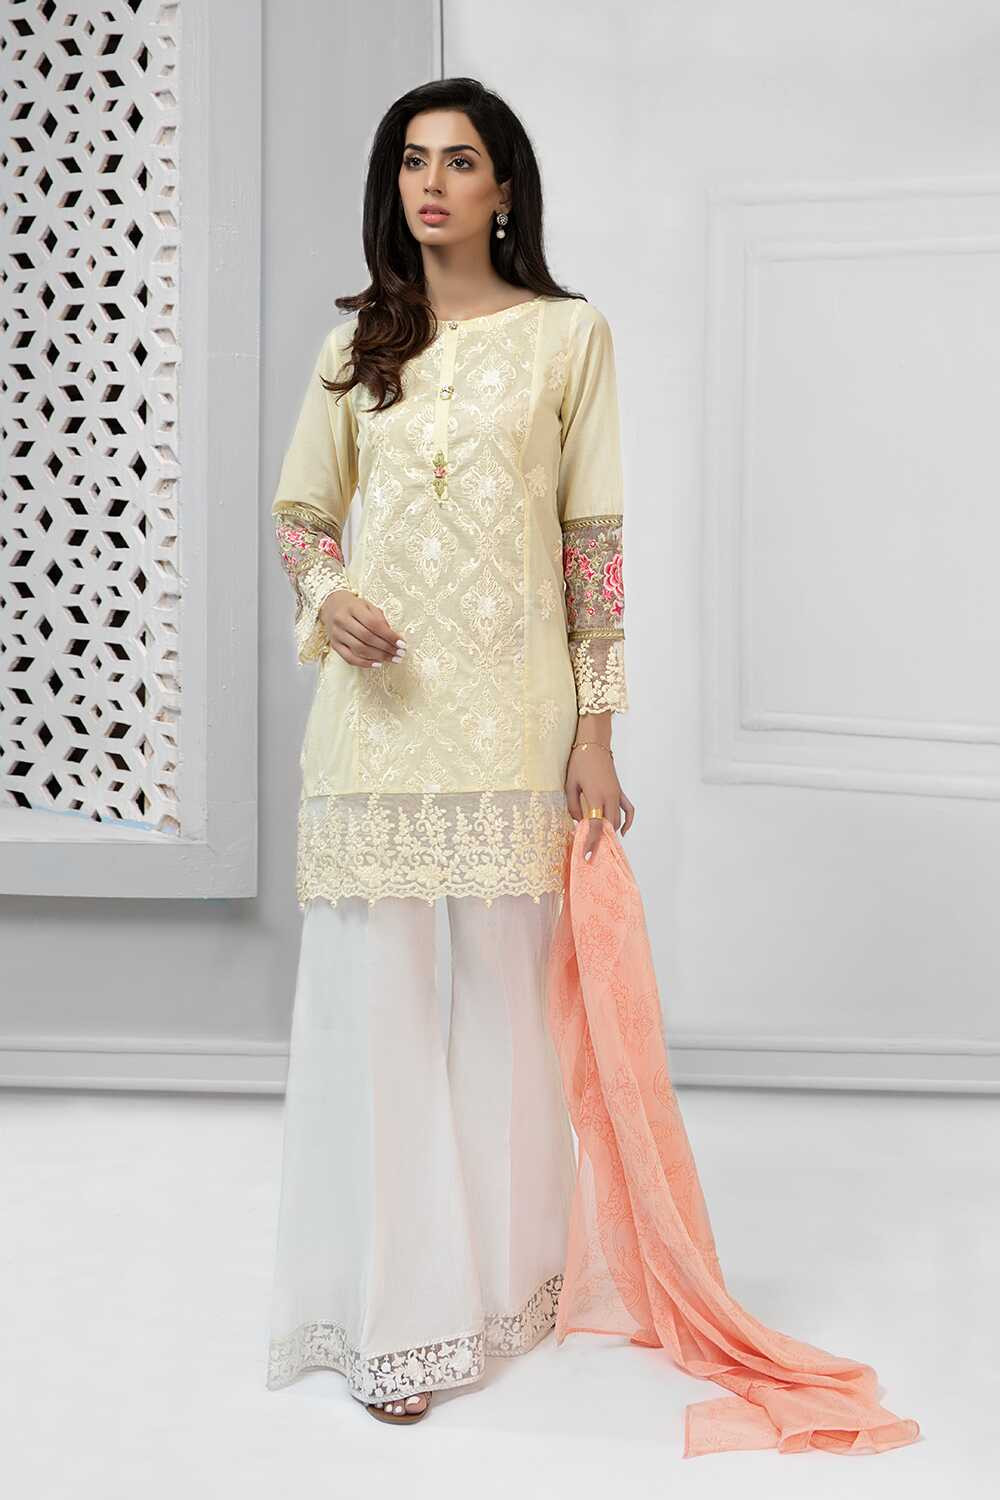 /2019/07/mariab-eid-collection-suit-light-yellow-dw-2218-image1.jpeg